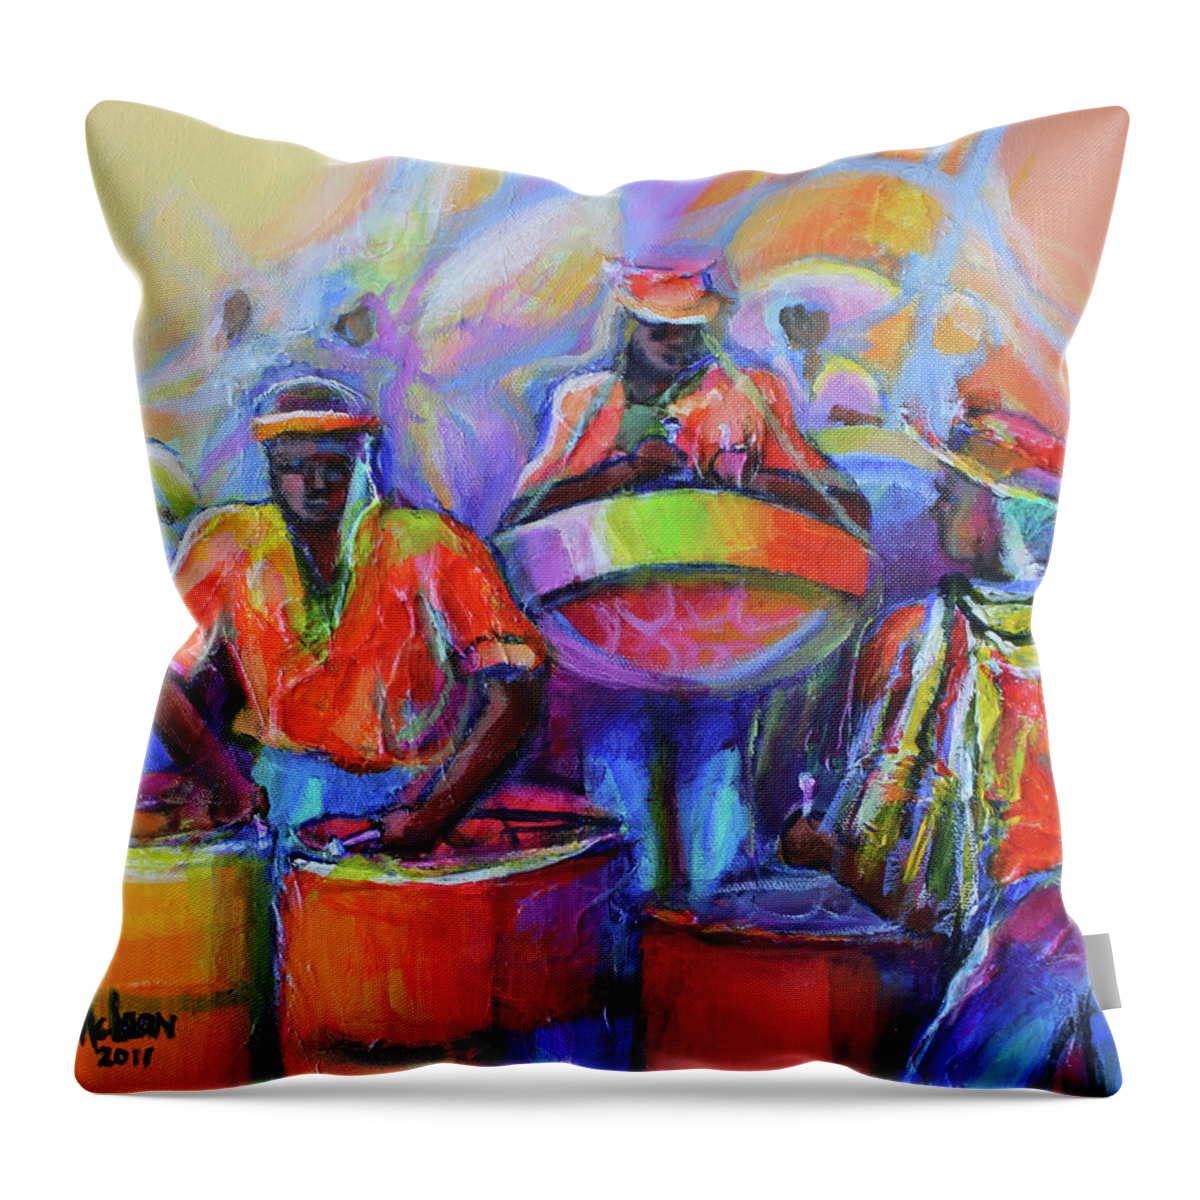 Abstract Throw Pillow featuring the painting Steel Pan Carnival by Cynthia McLean